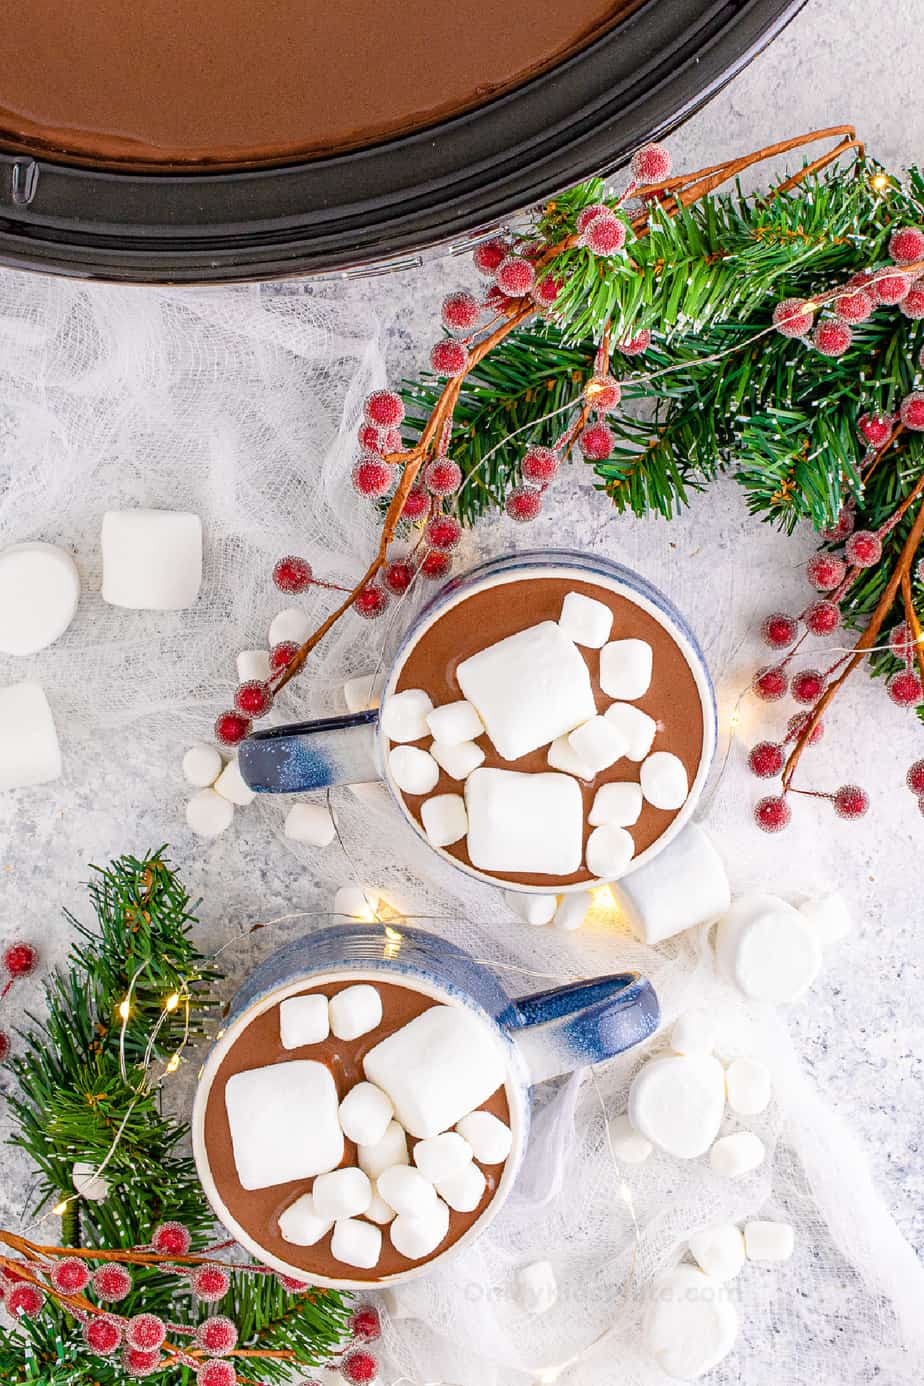 Overhead two mugs of hot chocolate with marshmallows next to the slow cooker near holiday garlands